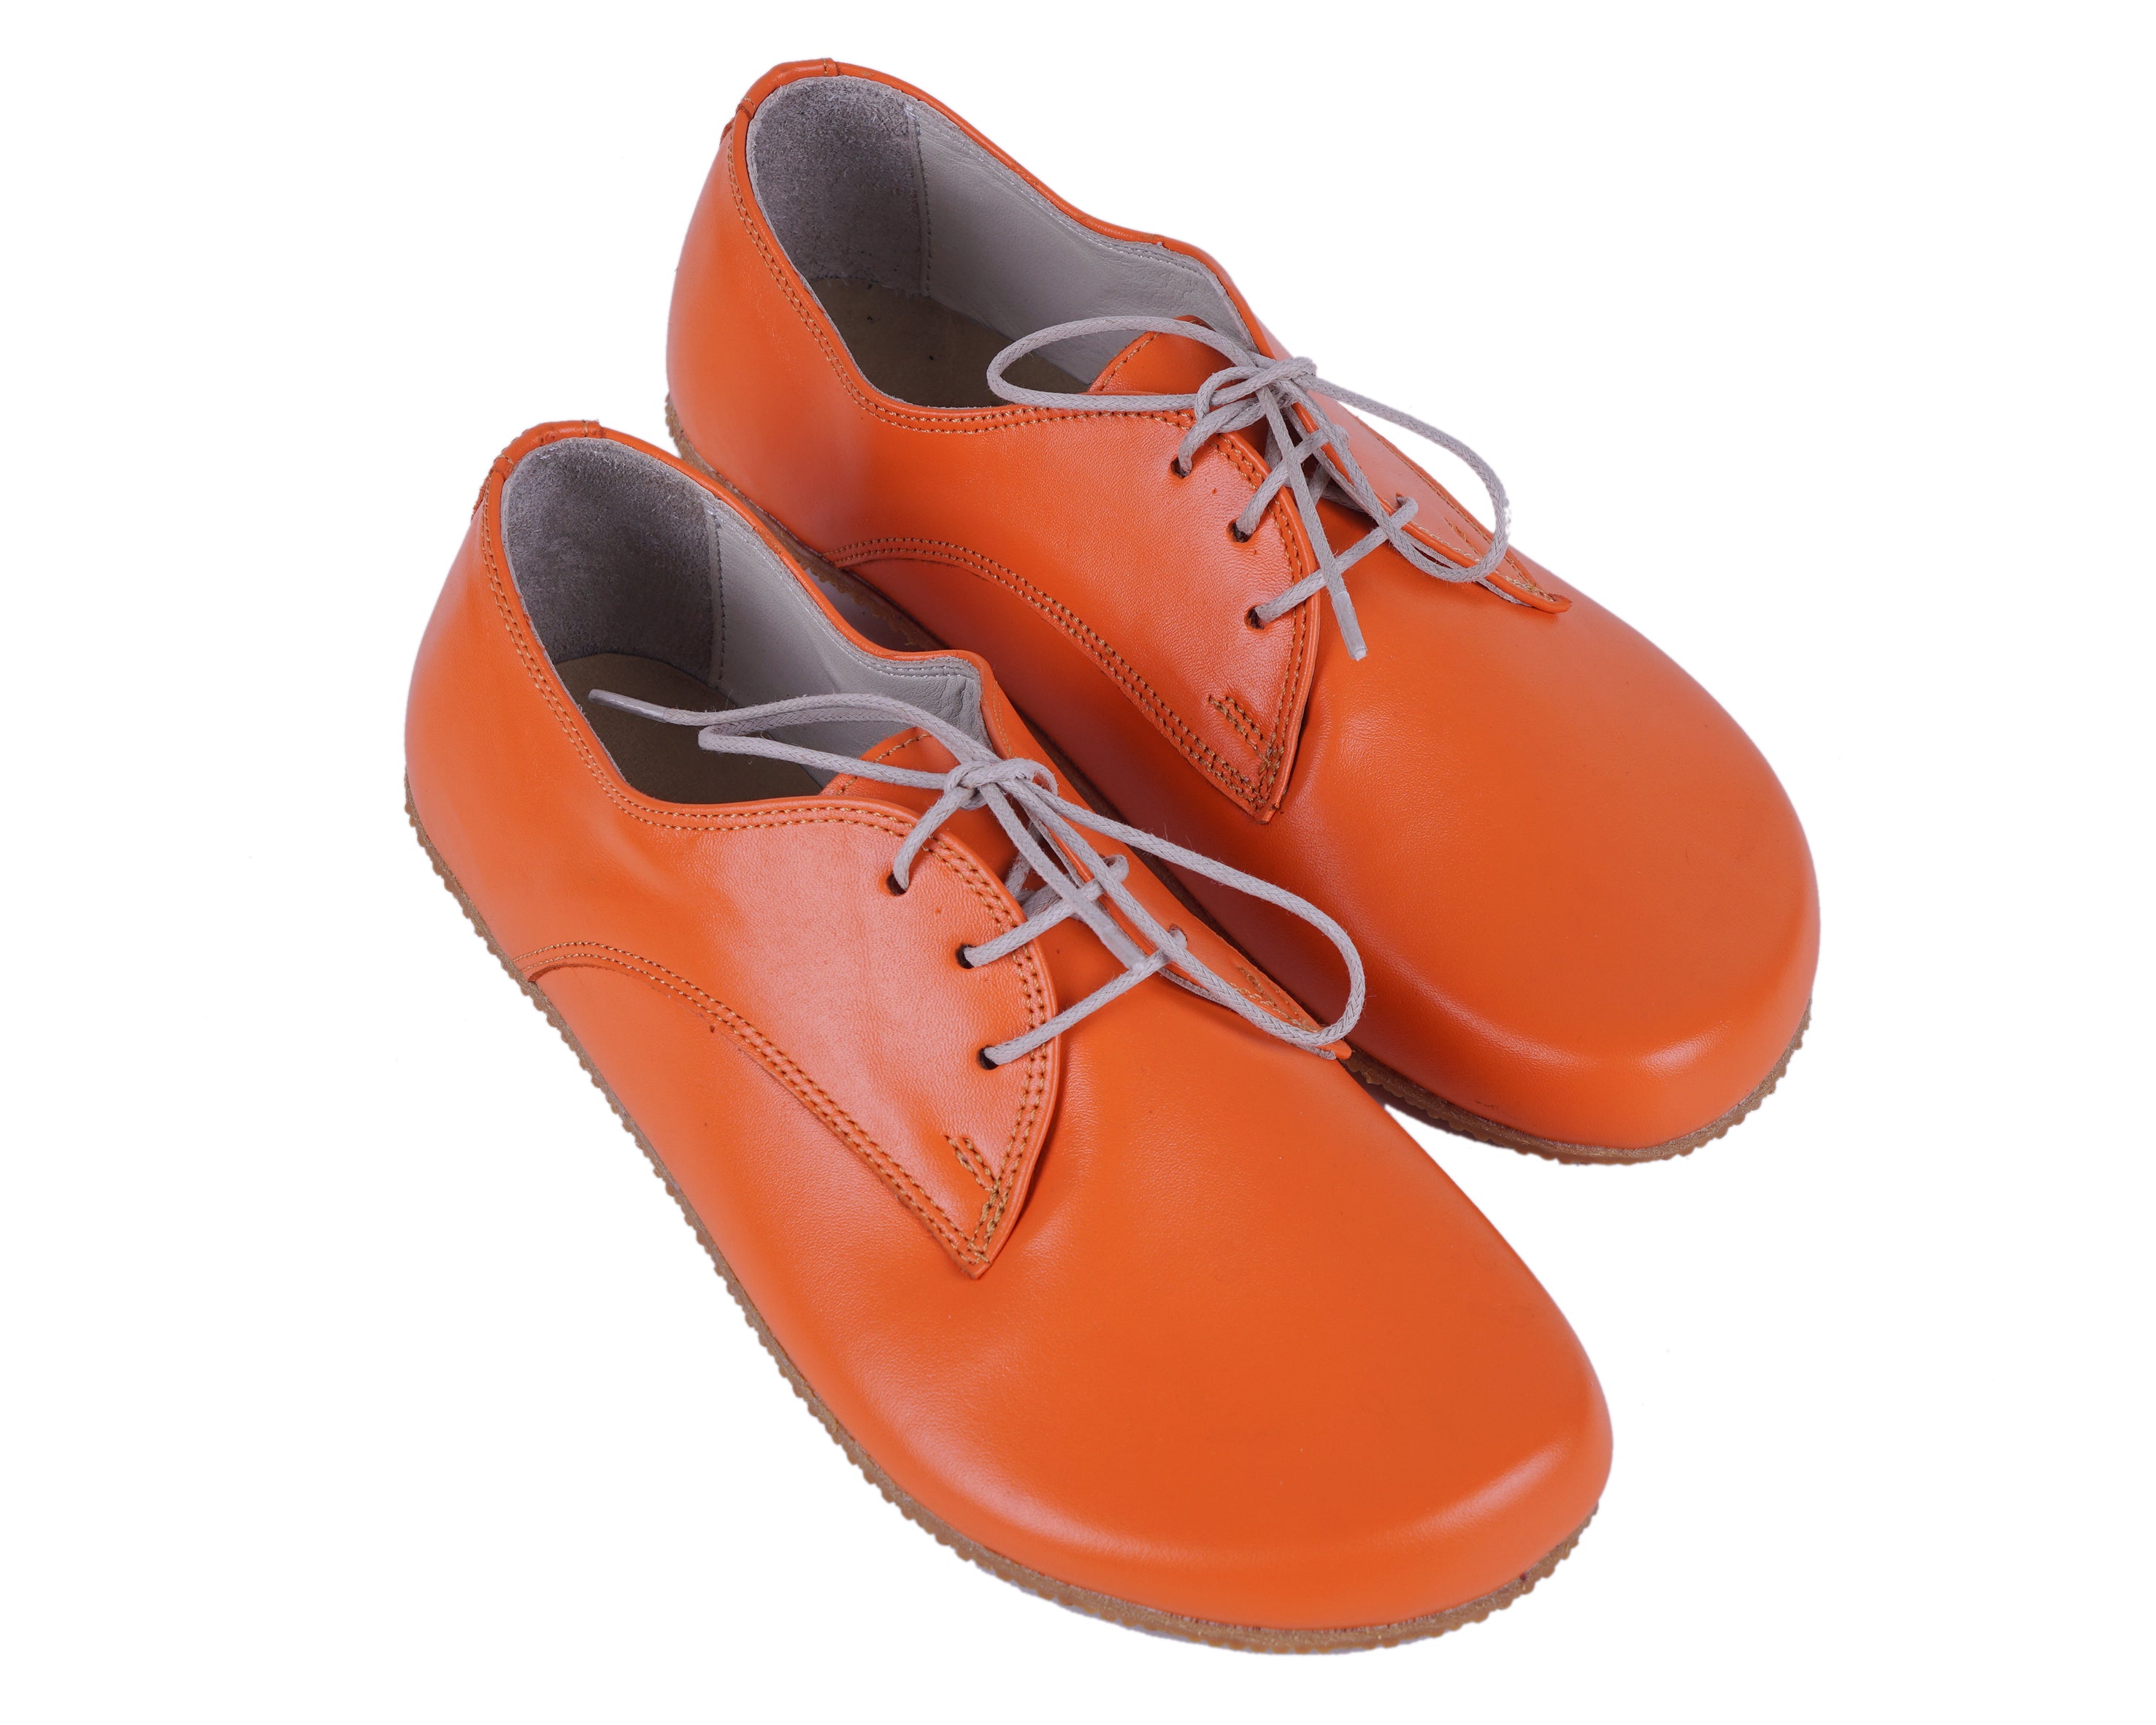 Orange Oxford Wide Barefoot Shoes Smooth Leather Handmade 4mm Rubber Outsole